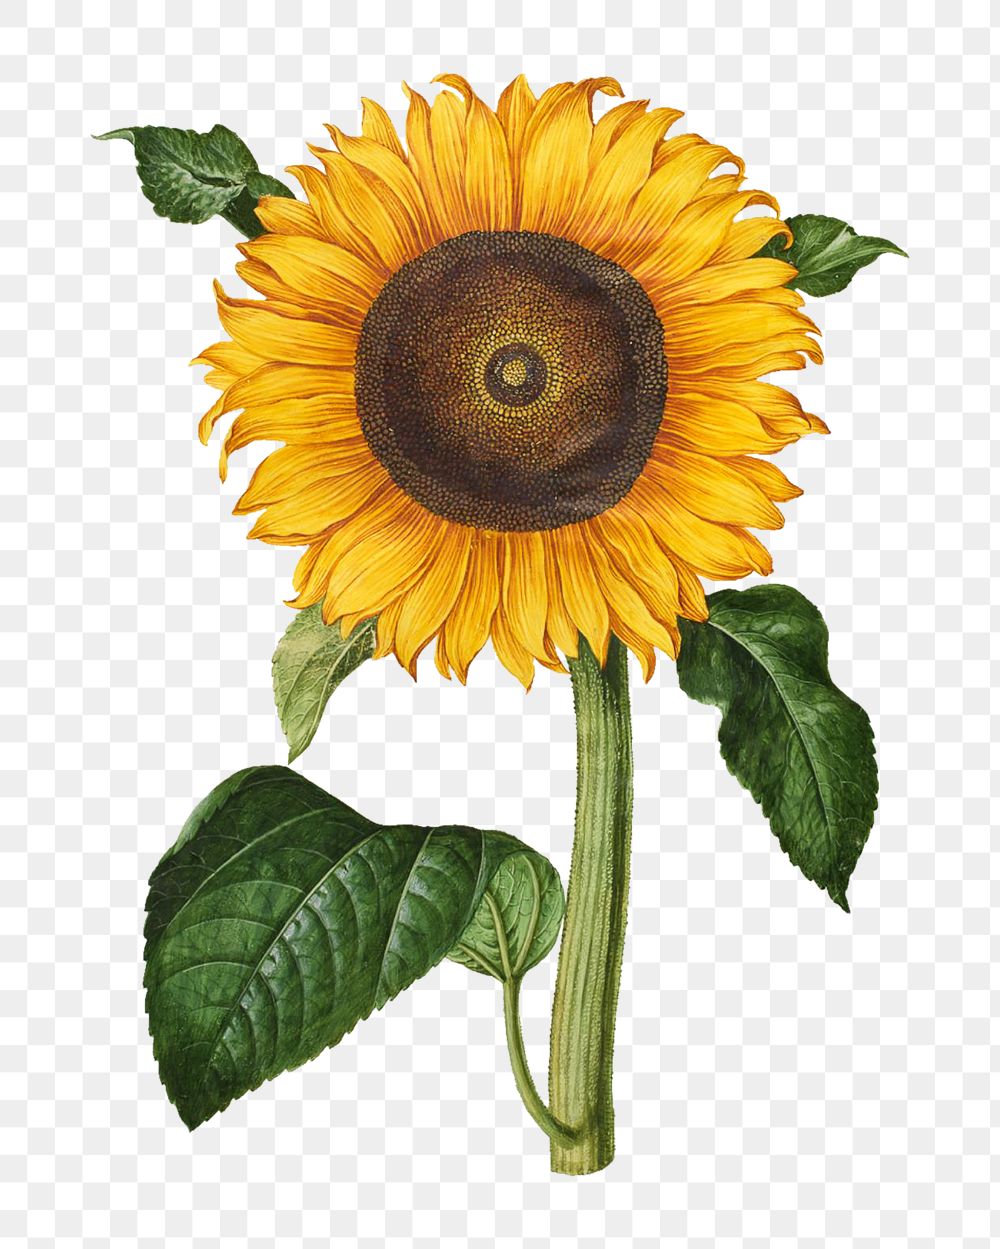 Vintage sunflower png, flower illustration by Maria Sibylla Merian, transparent background. Remixed by rawpixel.